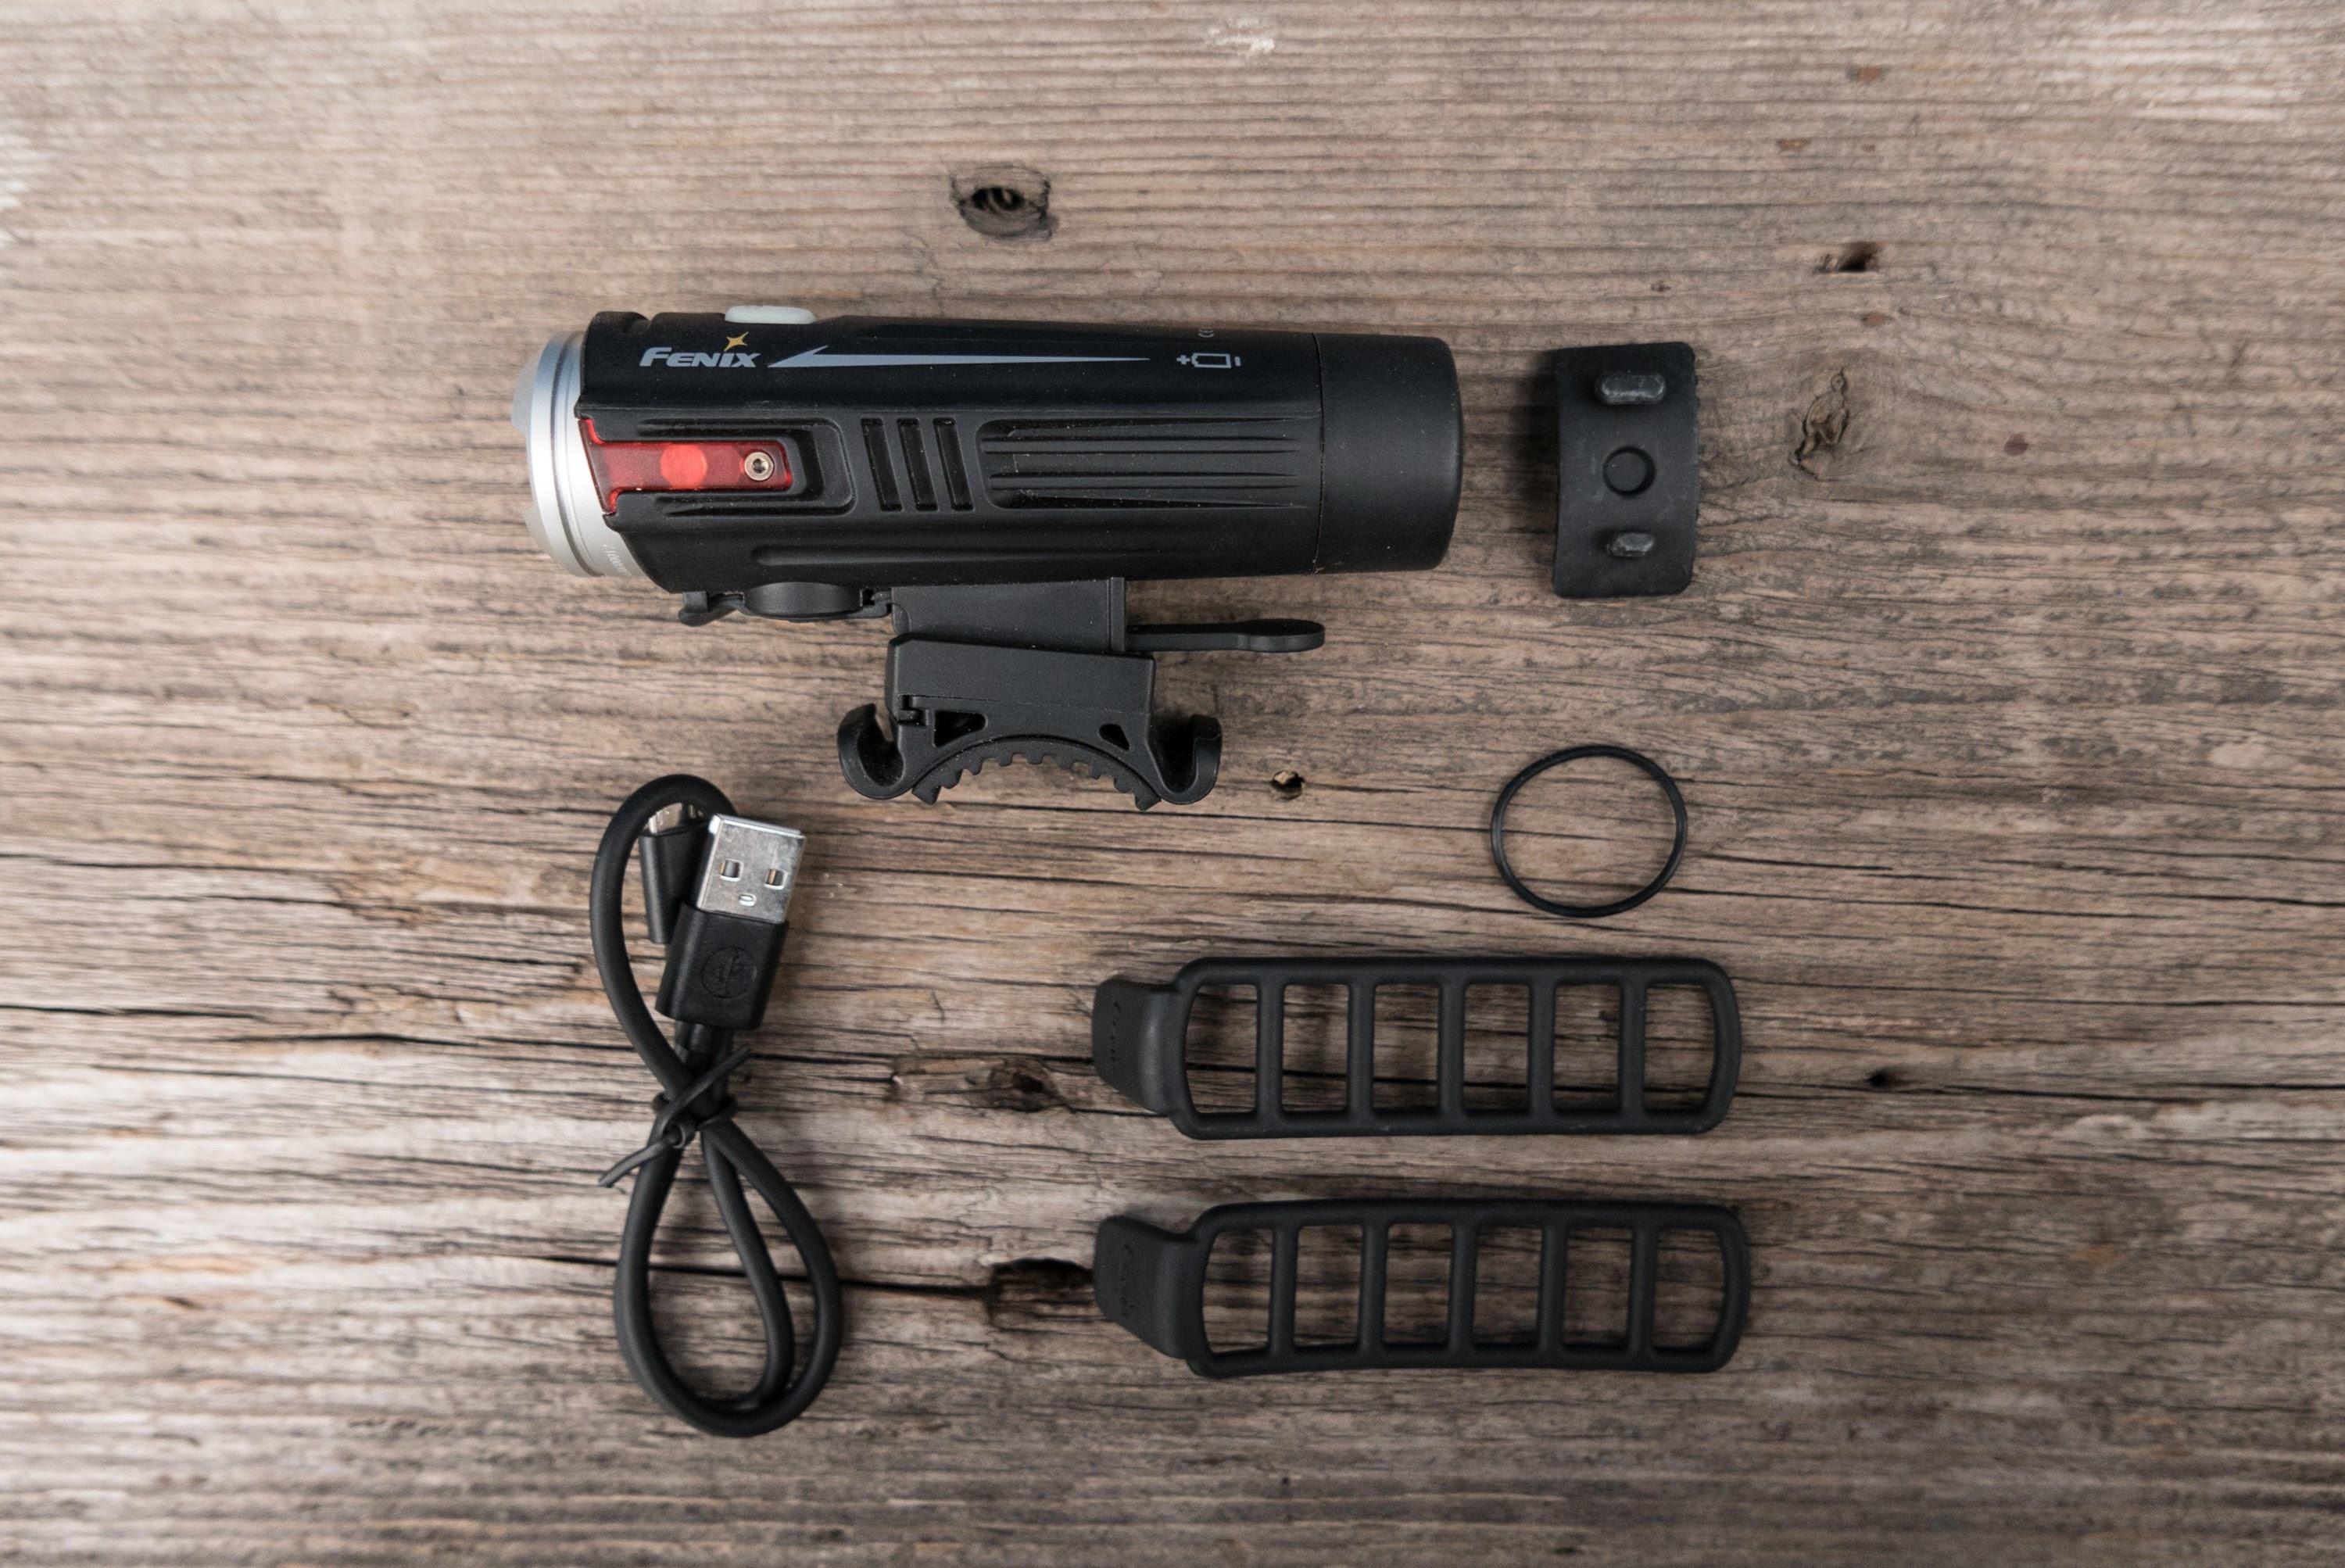 Fenix BC21R bicycle flashlight - for every occasion? – image 2